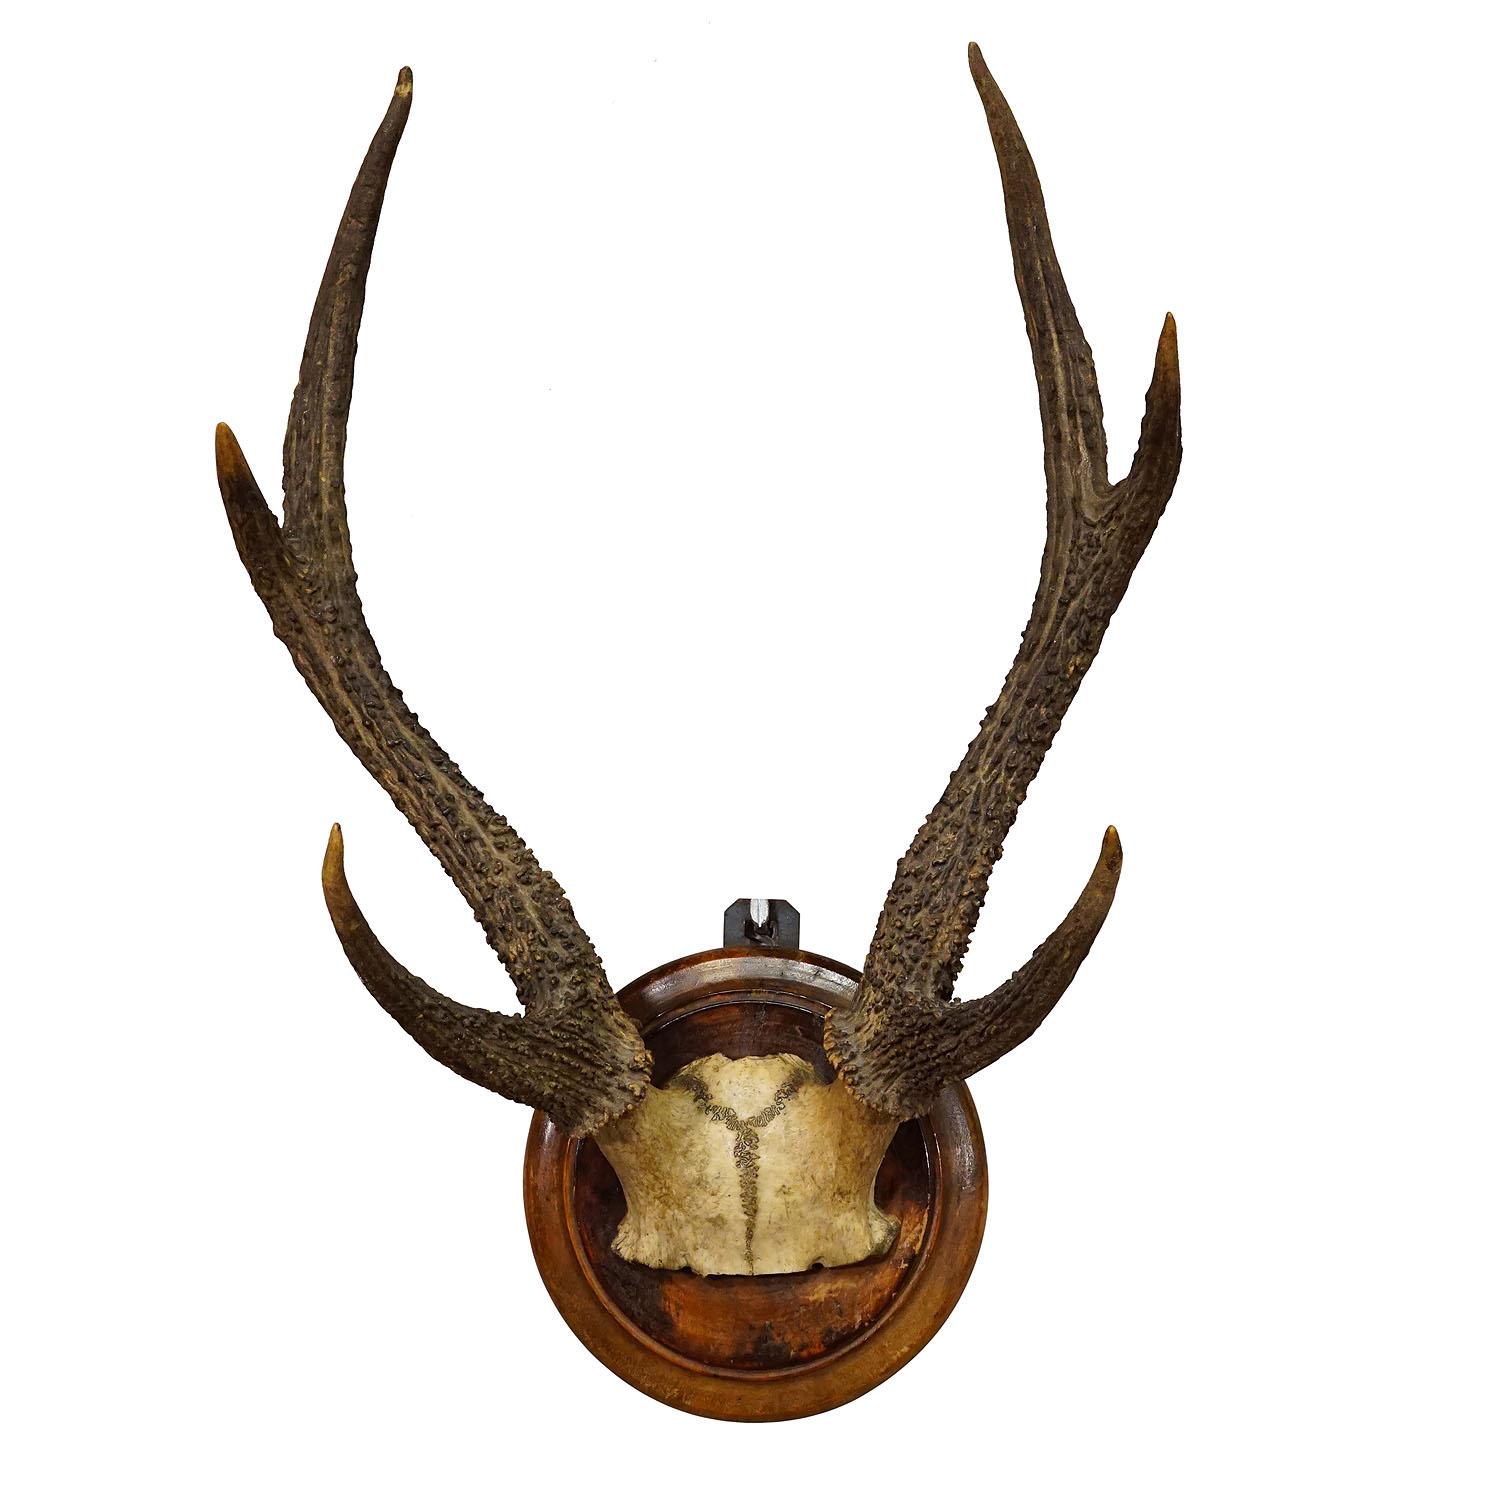 Antique Black Forest 6 Pointer Sika Deer Trophy on Wooden Plaque ca. 1900s

A great 6 pointer sika deer (Cervus nippon) trophy from the Black Forest shot in Germany around 1900. The large antlers are mounted on a turned wall plaque with brown